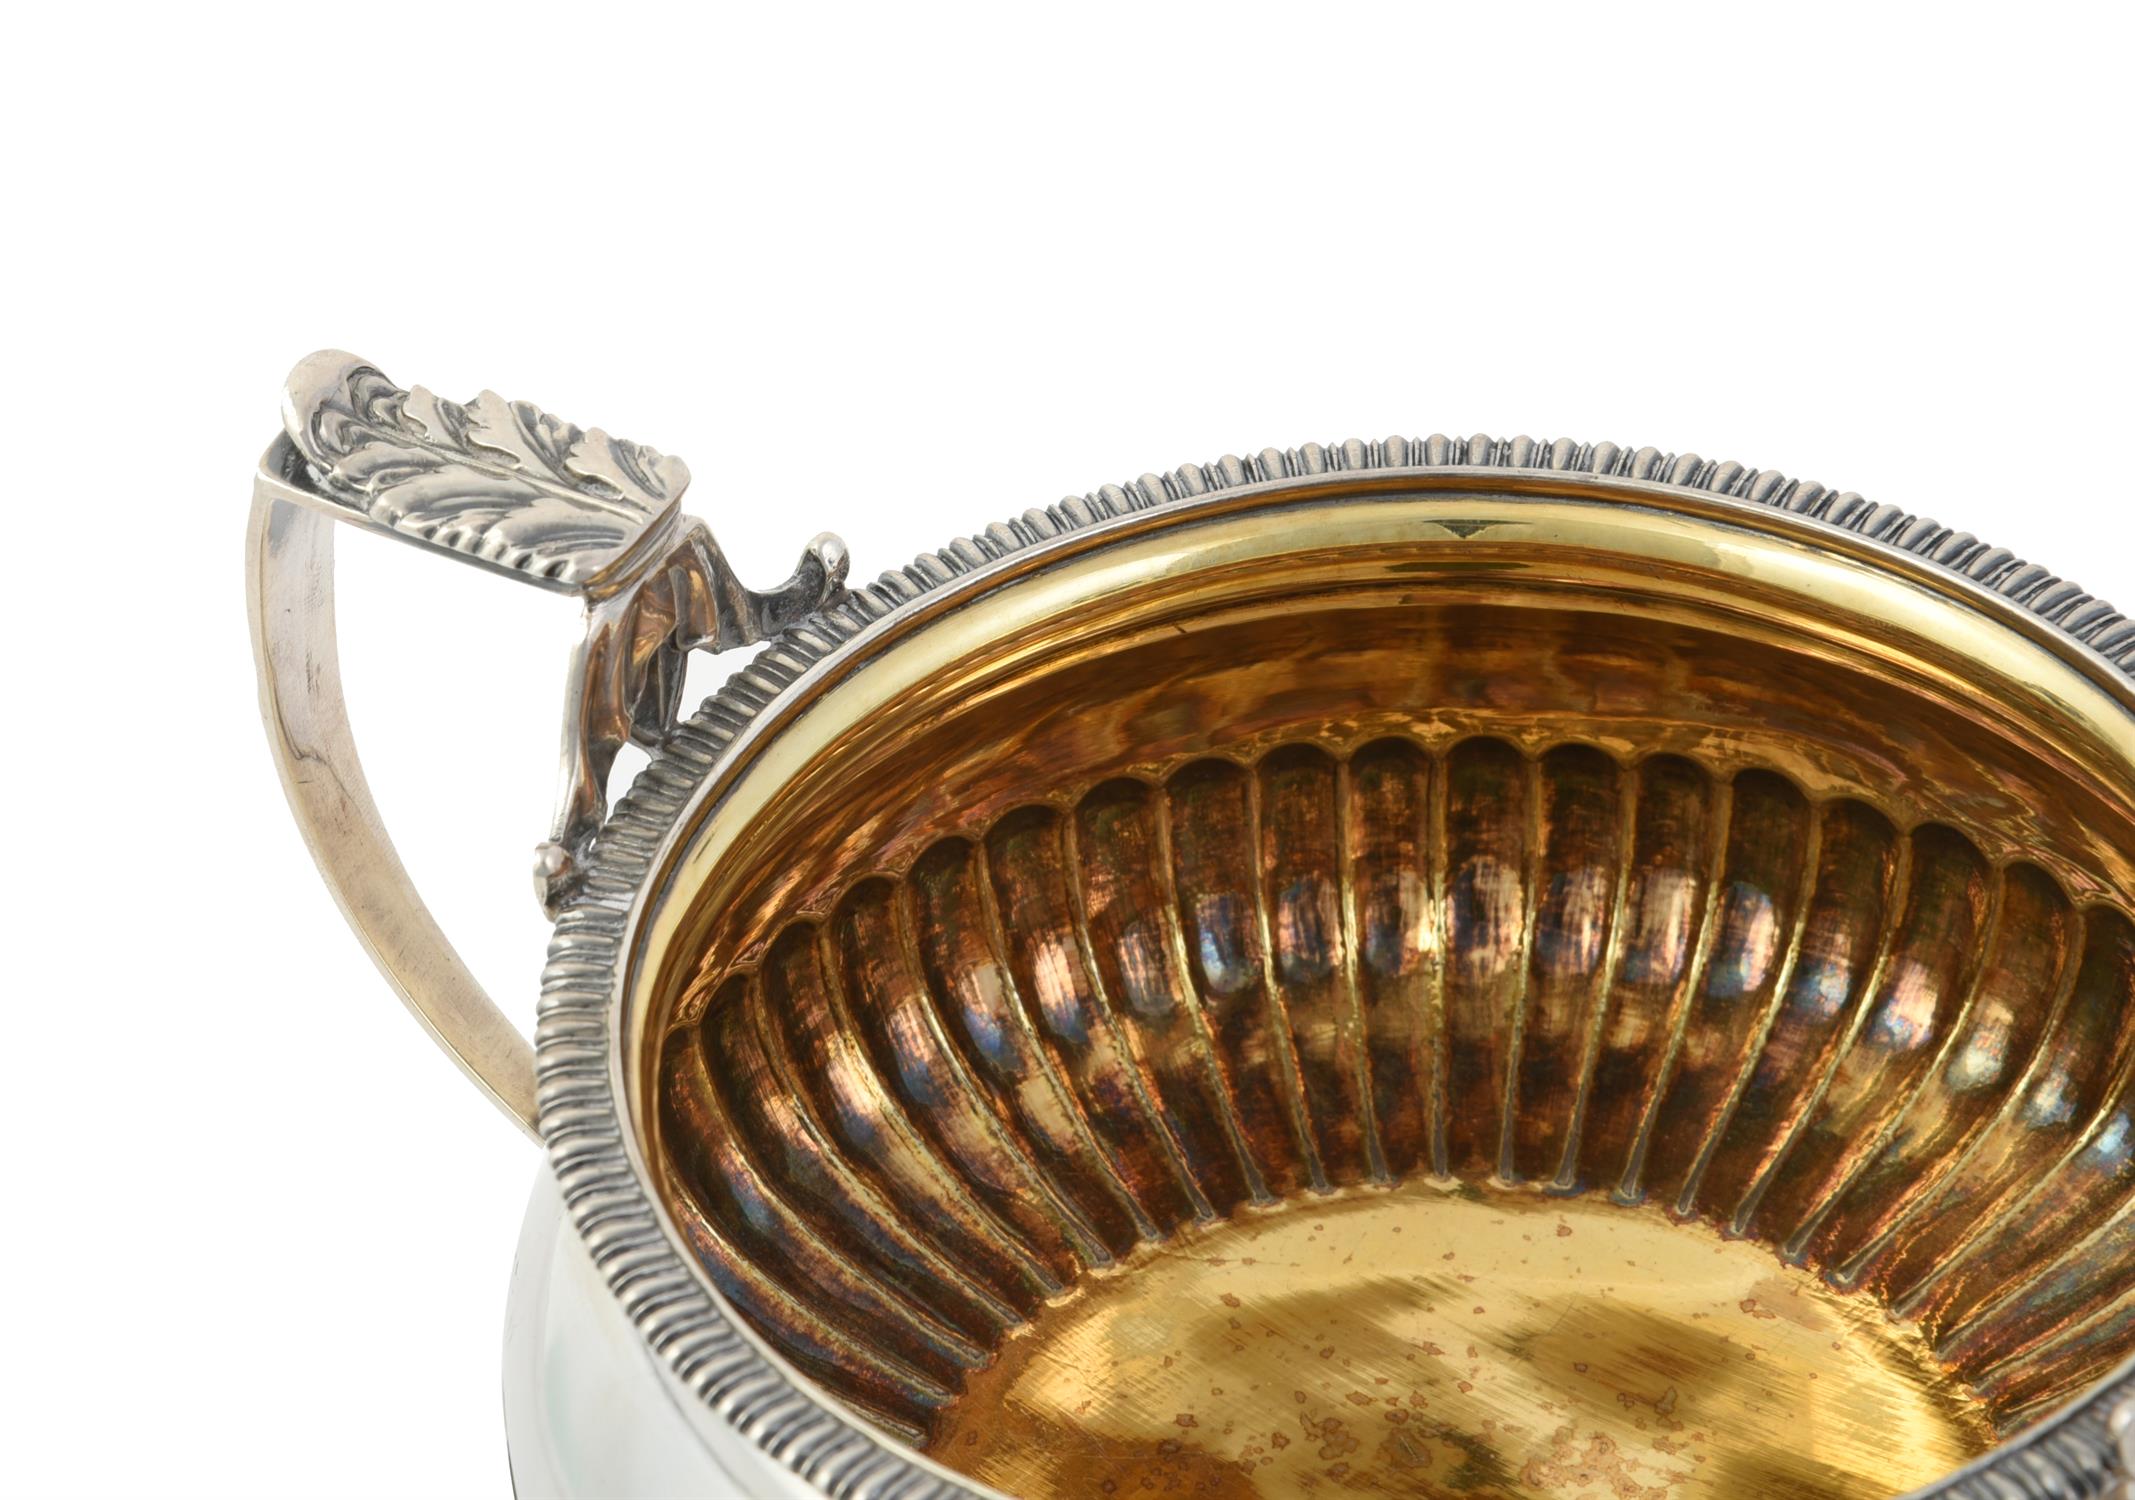 A George III silver twin handled sugar bowl by Samuel Hennell & John Terry - Image 2 of 2